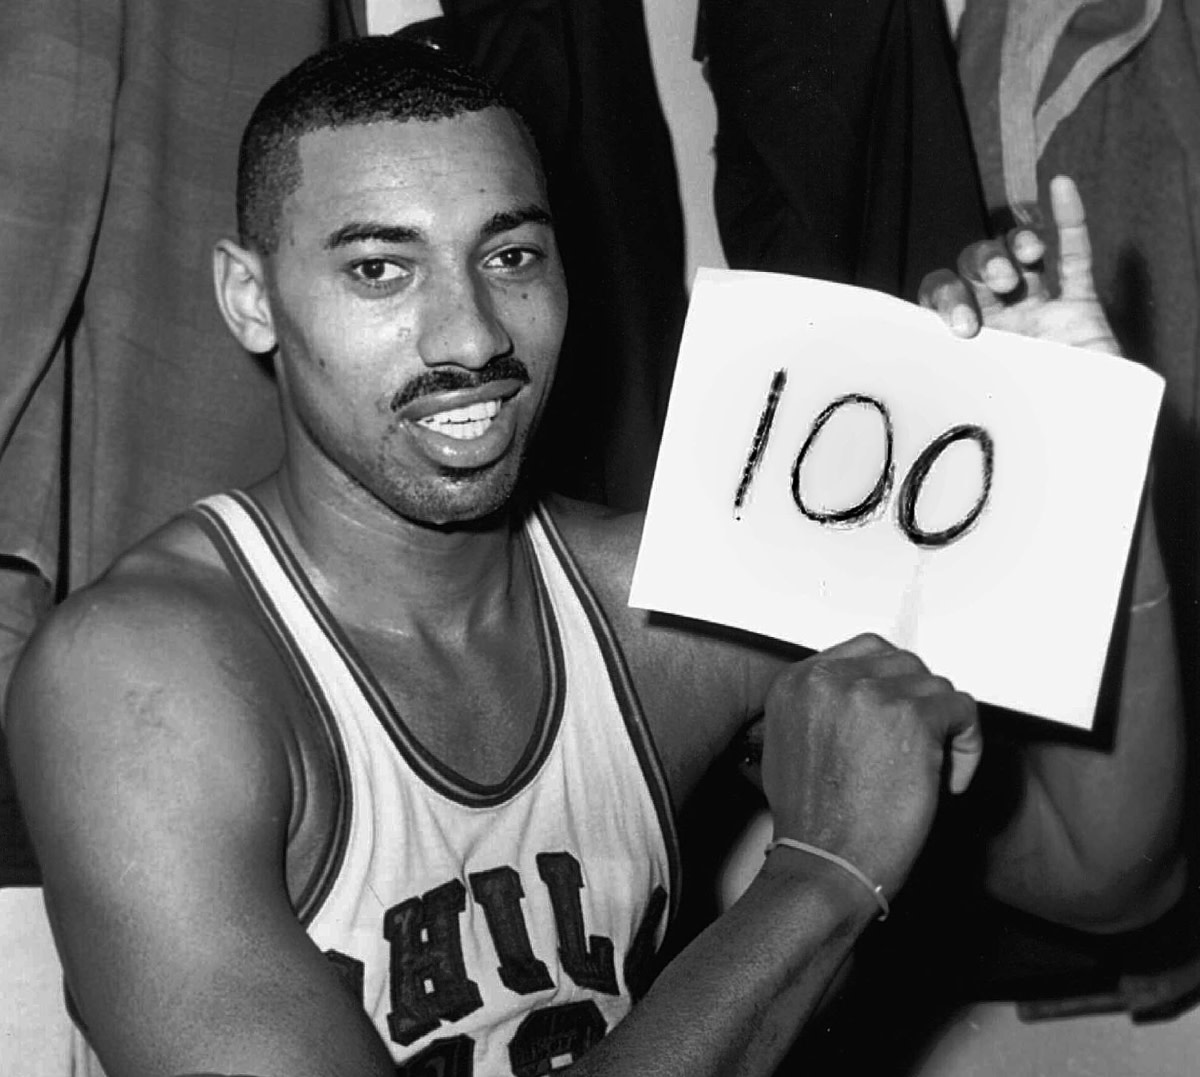 Wilt Chamberlain Once Said He Was Embarrassed Of His 100-Point Game: "The 100-Point Game Will Never Be As Important To Me As It Is To Other People. You Take That Many Shots On The Playground And No One Ever Wants You On Their Team Again."